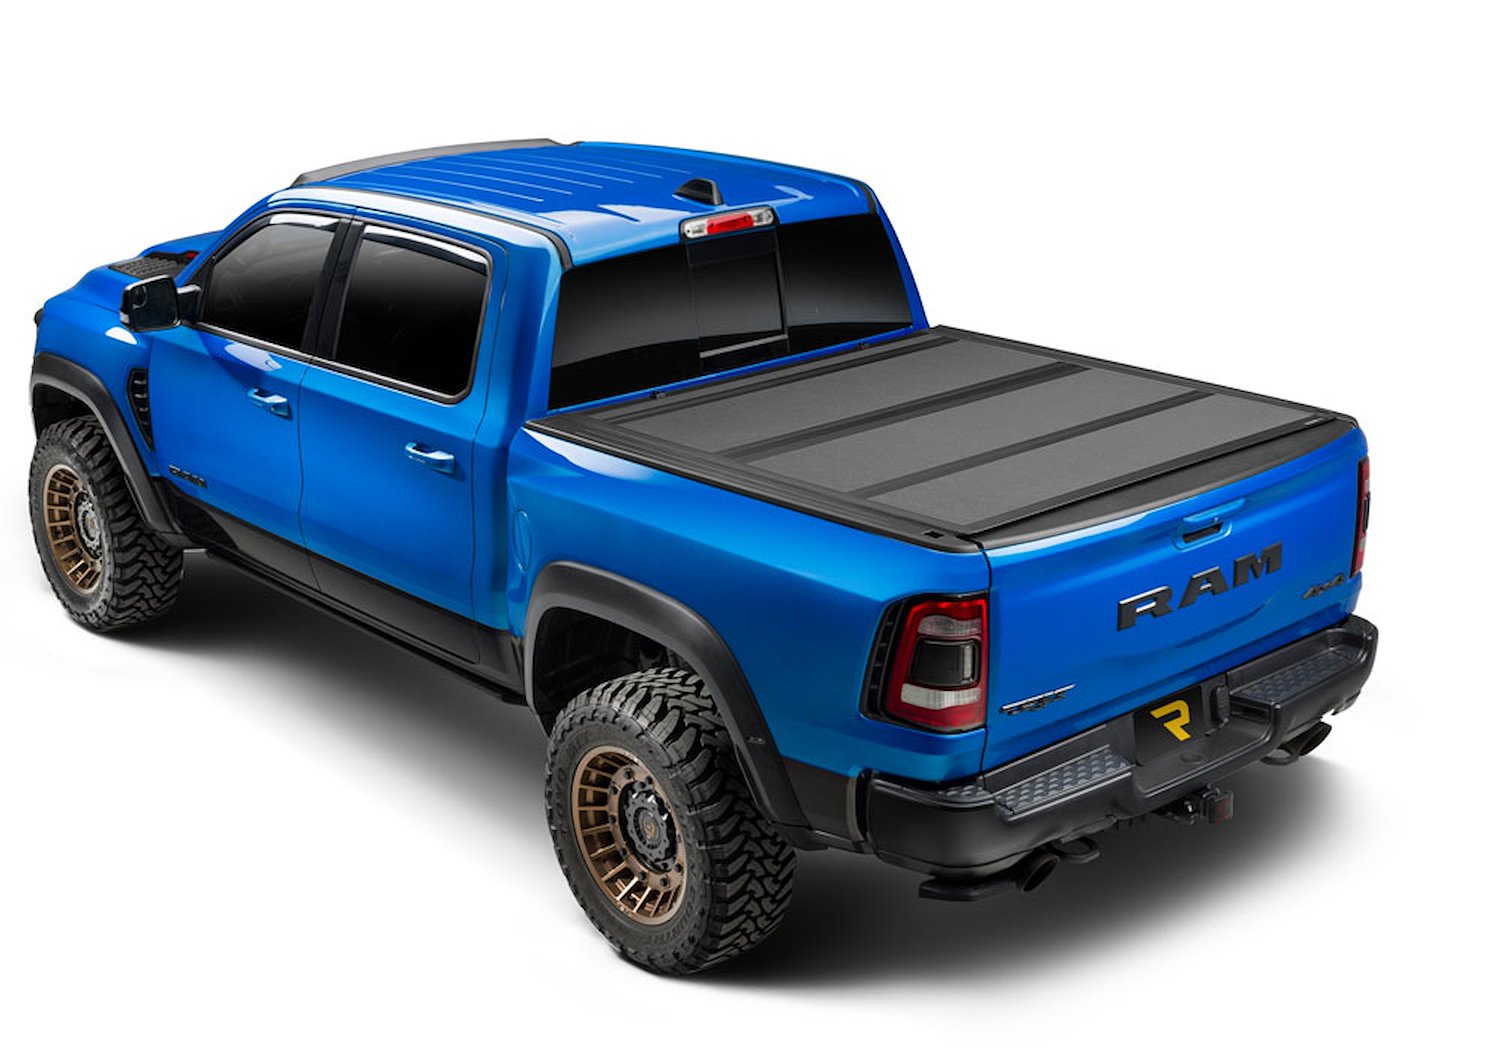 80461 Endure ALX Tonneau Cover for 14-21 Tundra 5 ft.7 in. w/ Deck Rail Sys w/out Trl Spcl Edtn Strg Bxs